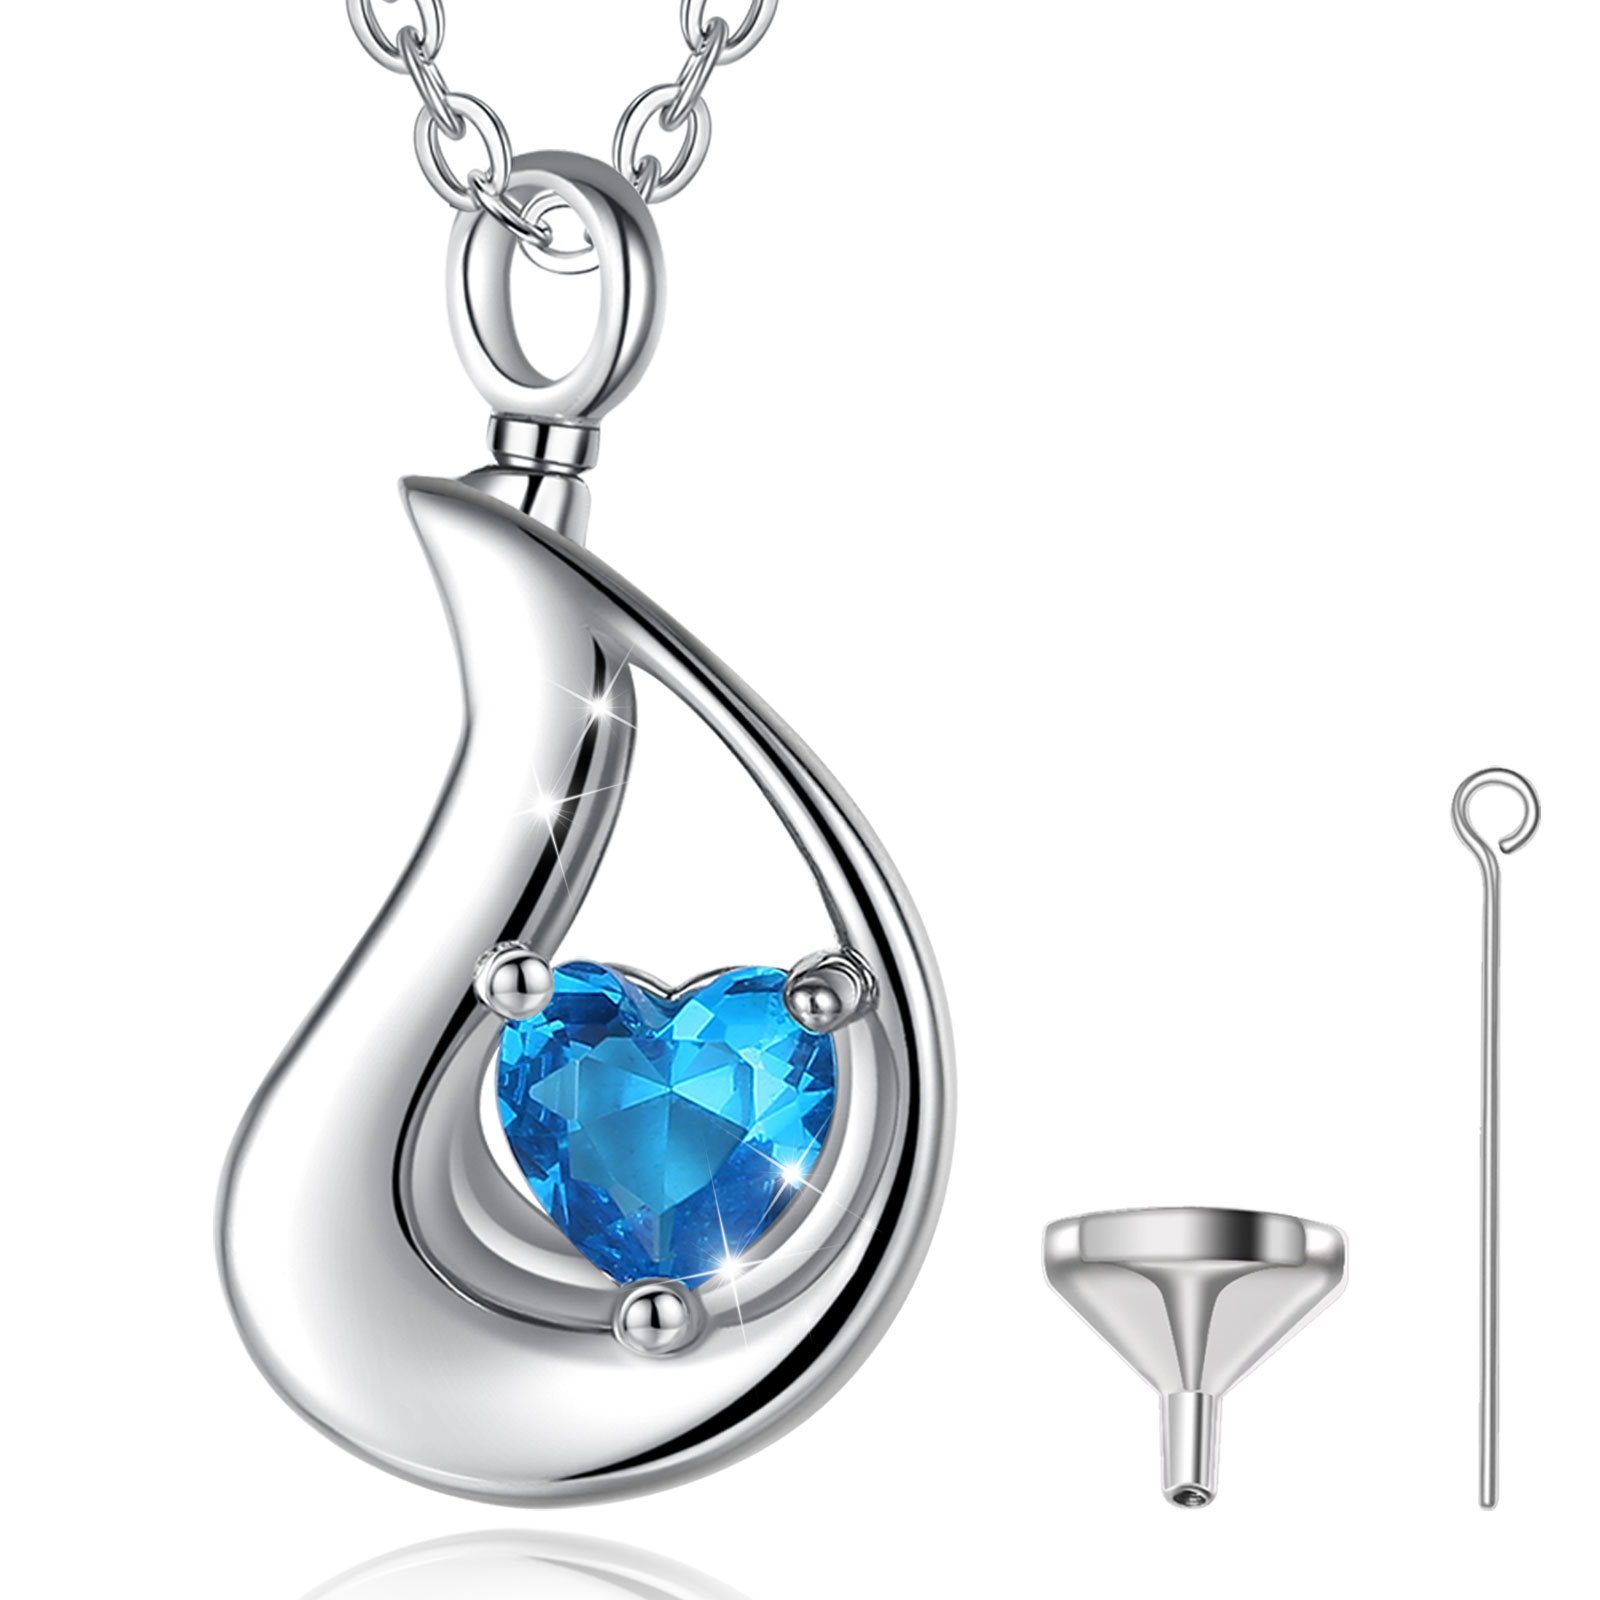 Merryshine Drop Shaped 925 Sterling Silver Cremation Jewelry Human Ashes Urn Necklace